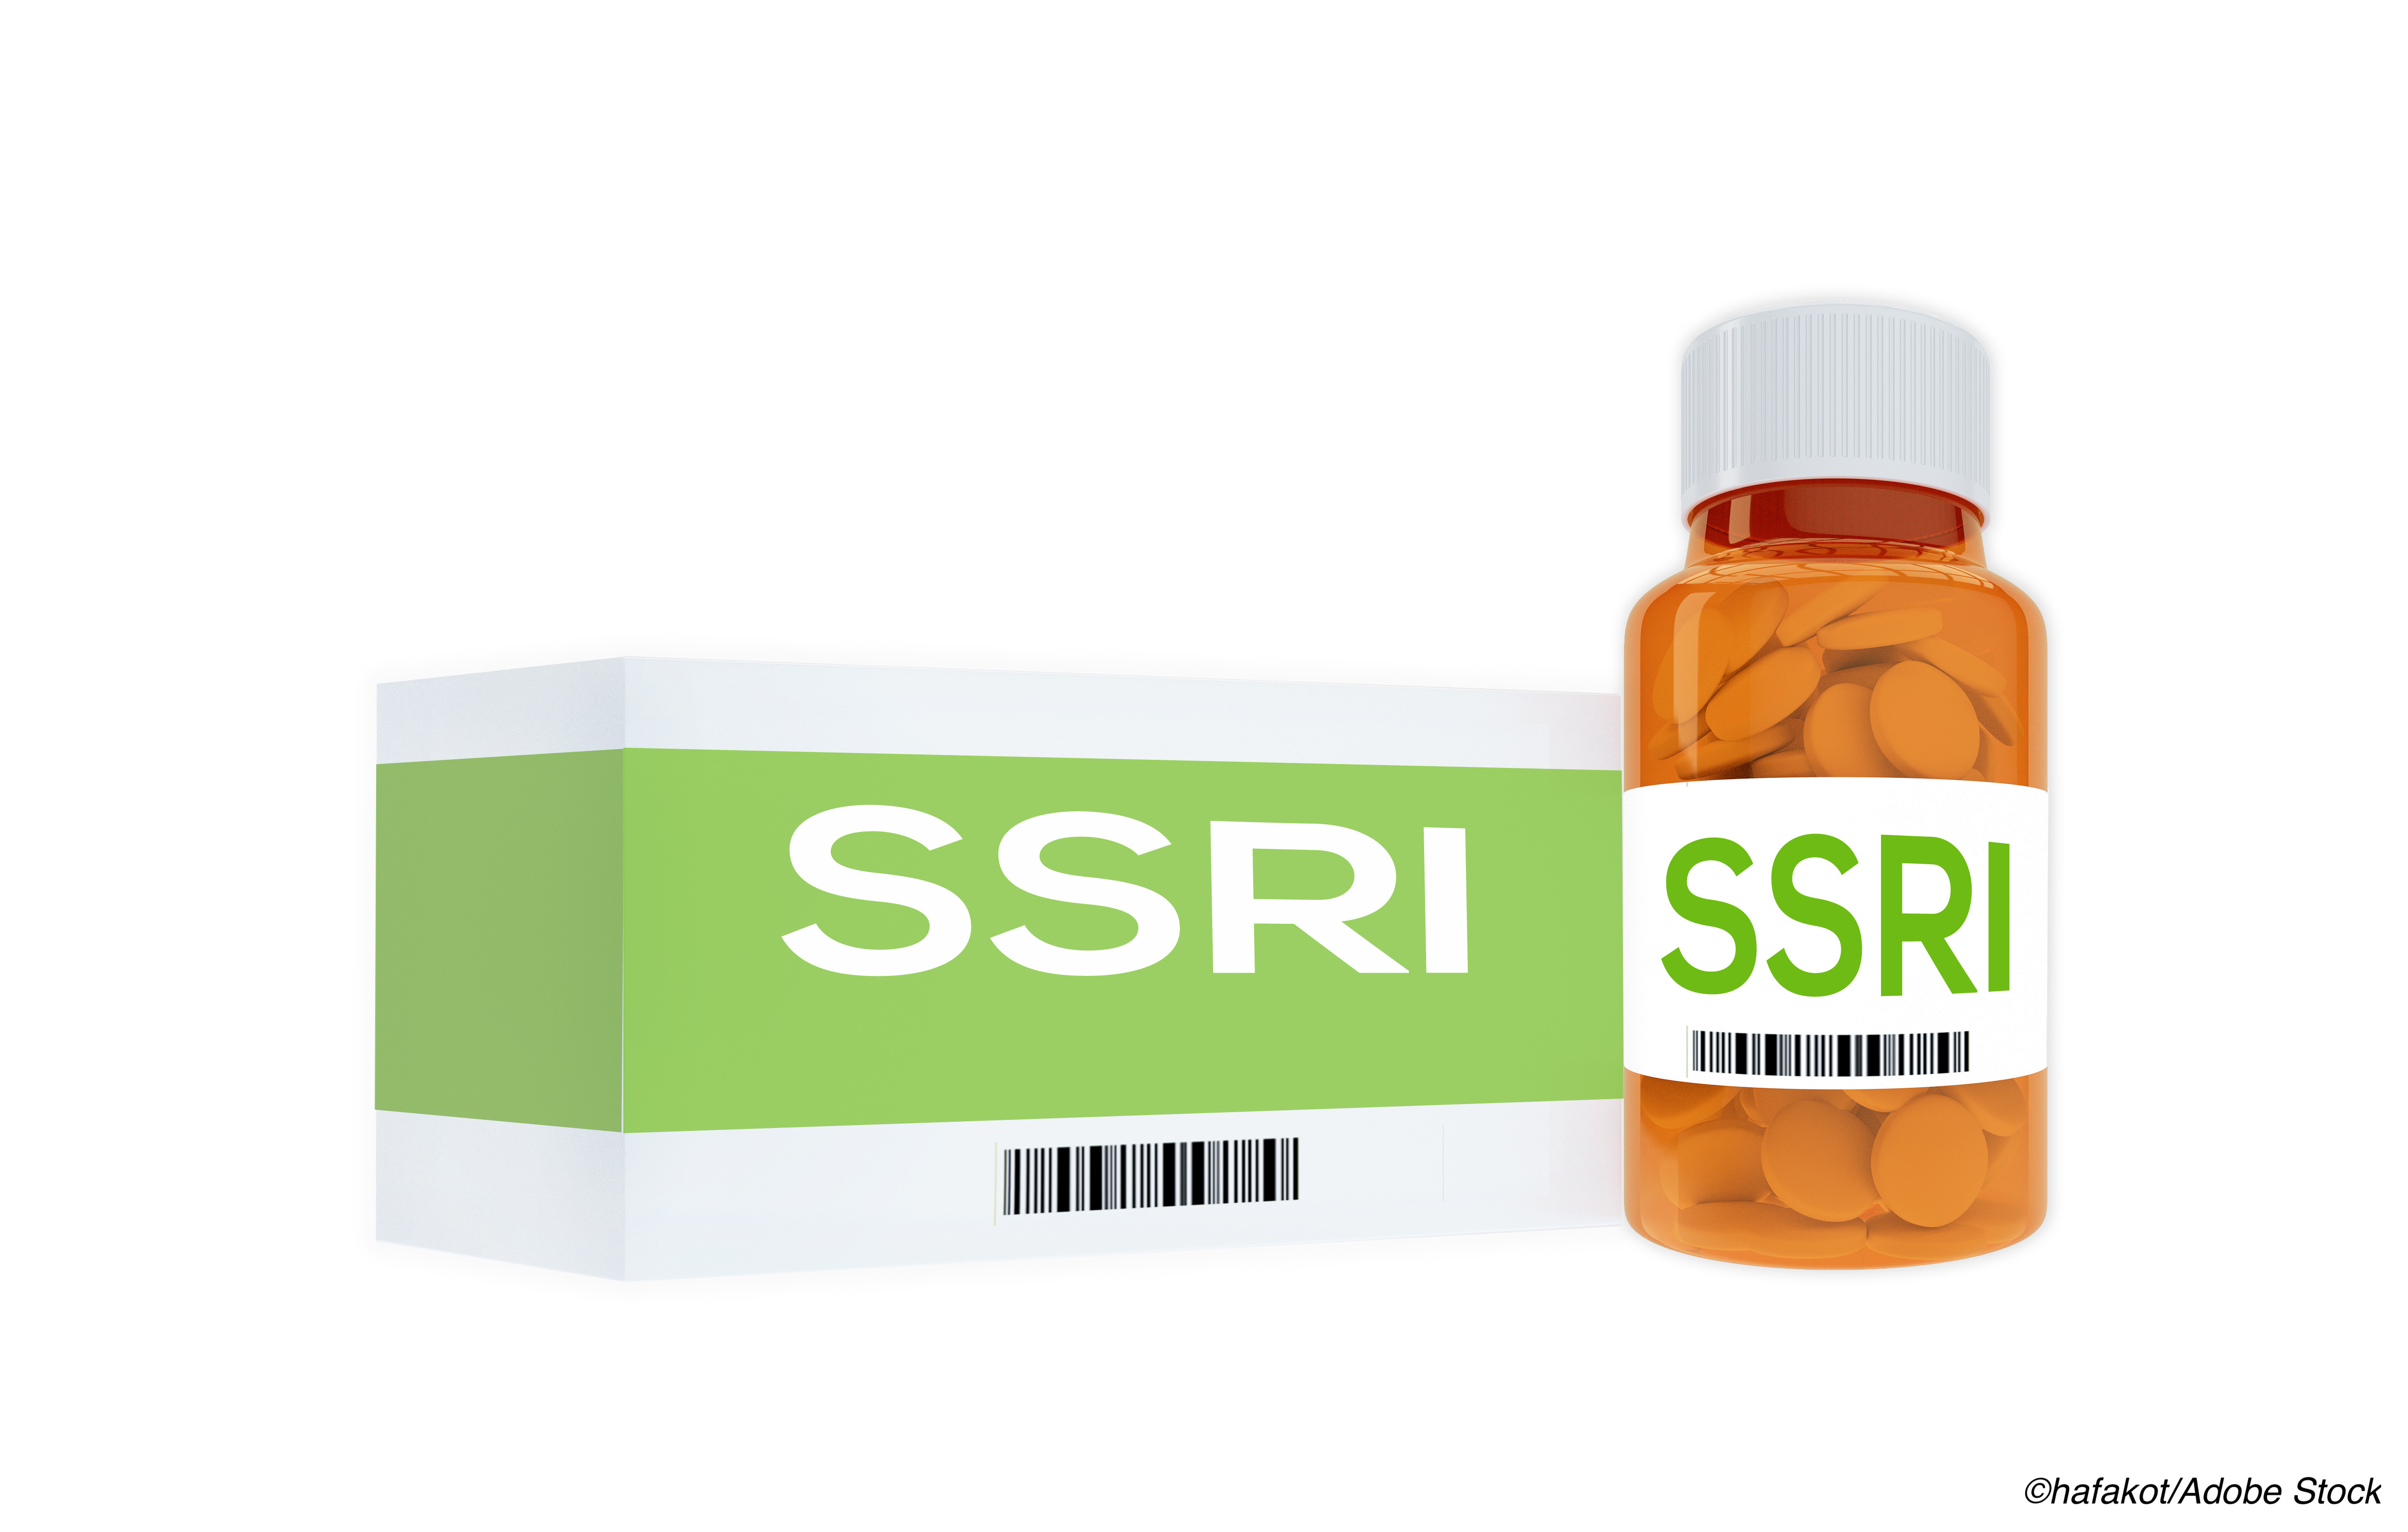 Covid-19: Study Suggests Benefit for SSRI